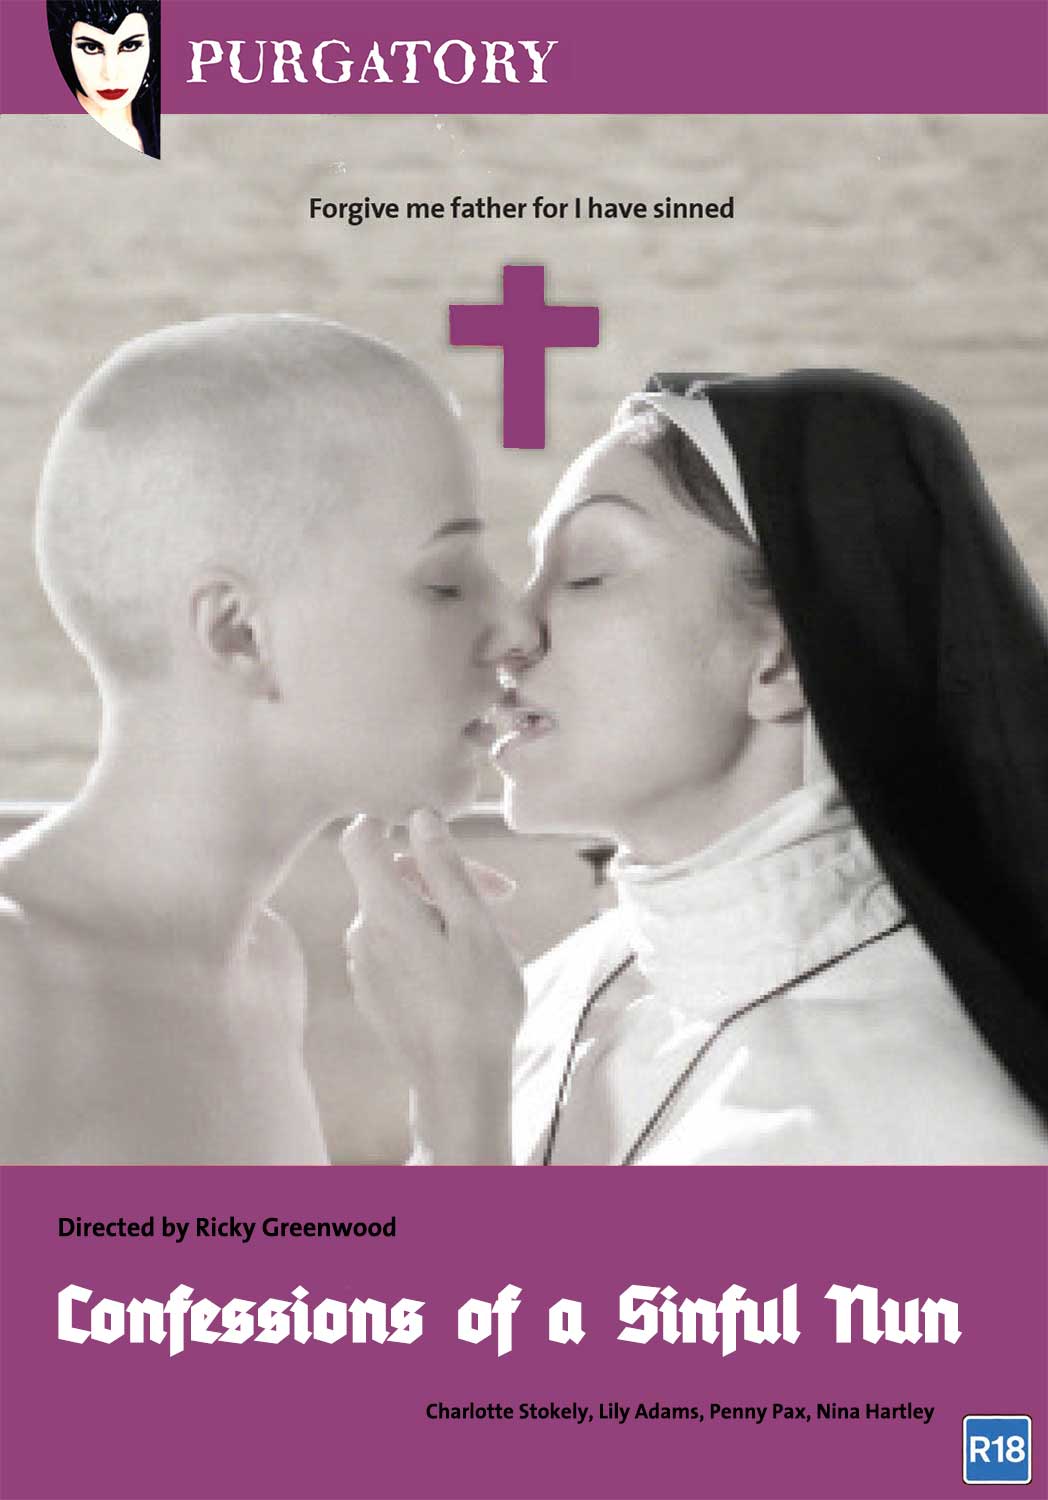 Full Uncut Purgatory label version of bestselling Redemption DVD Confessions of a Sinful Nun